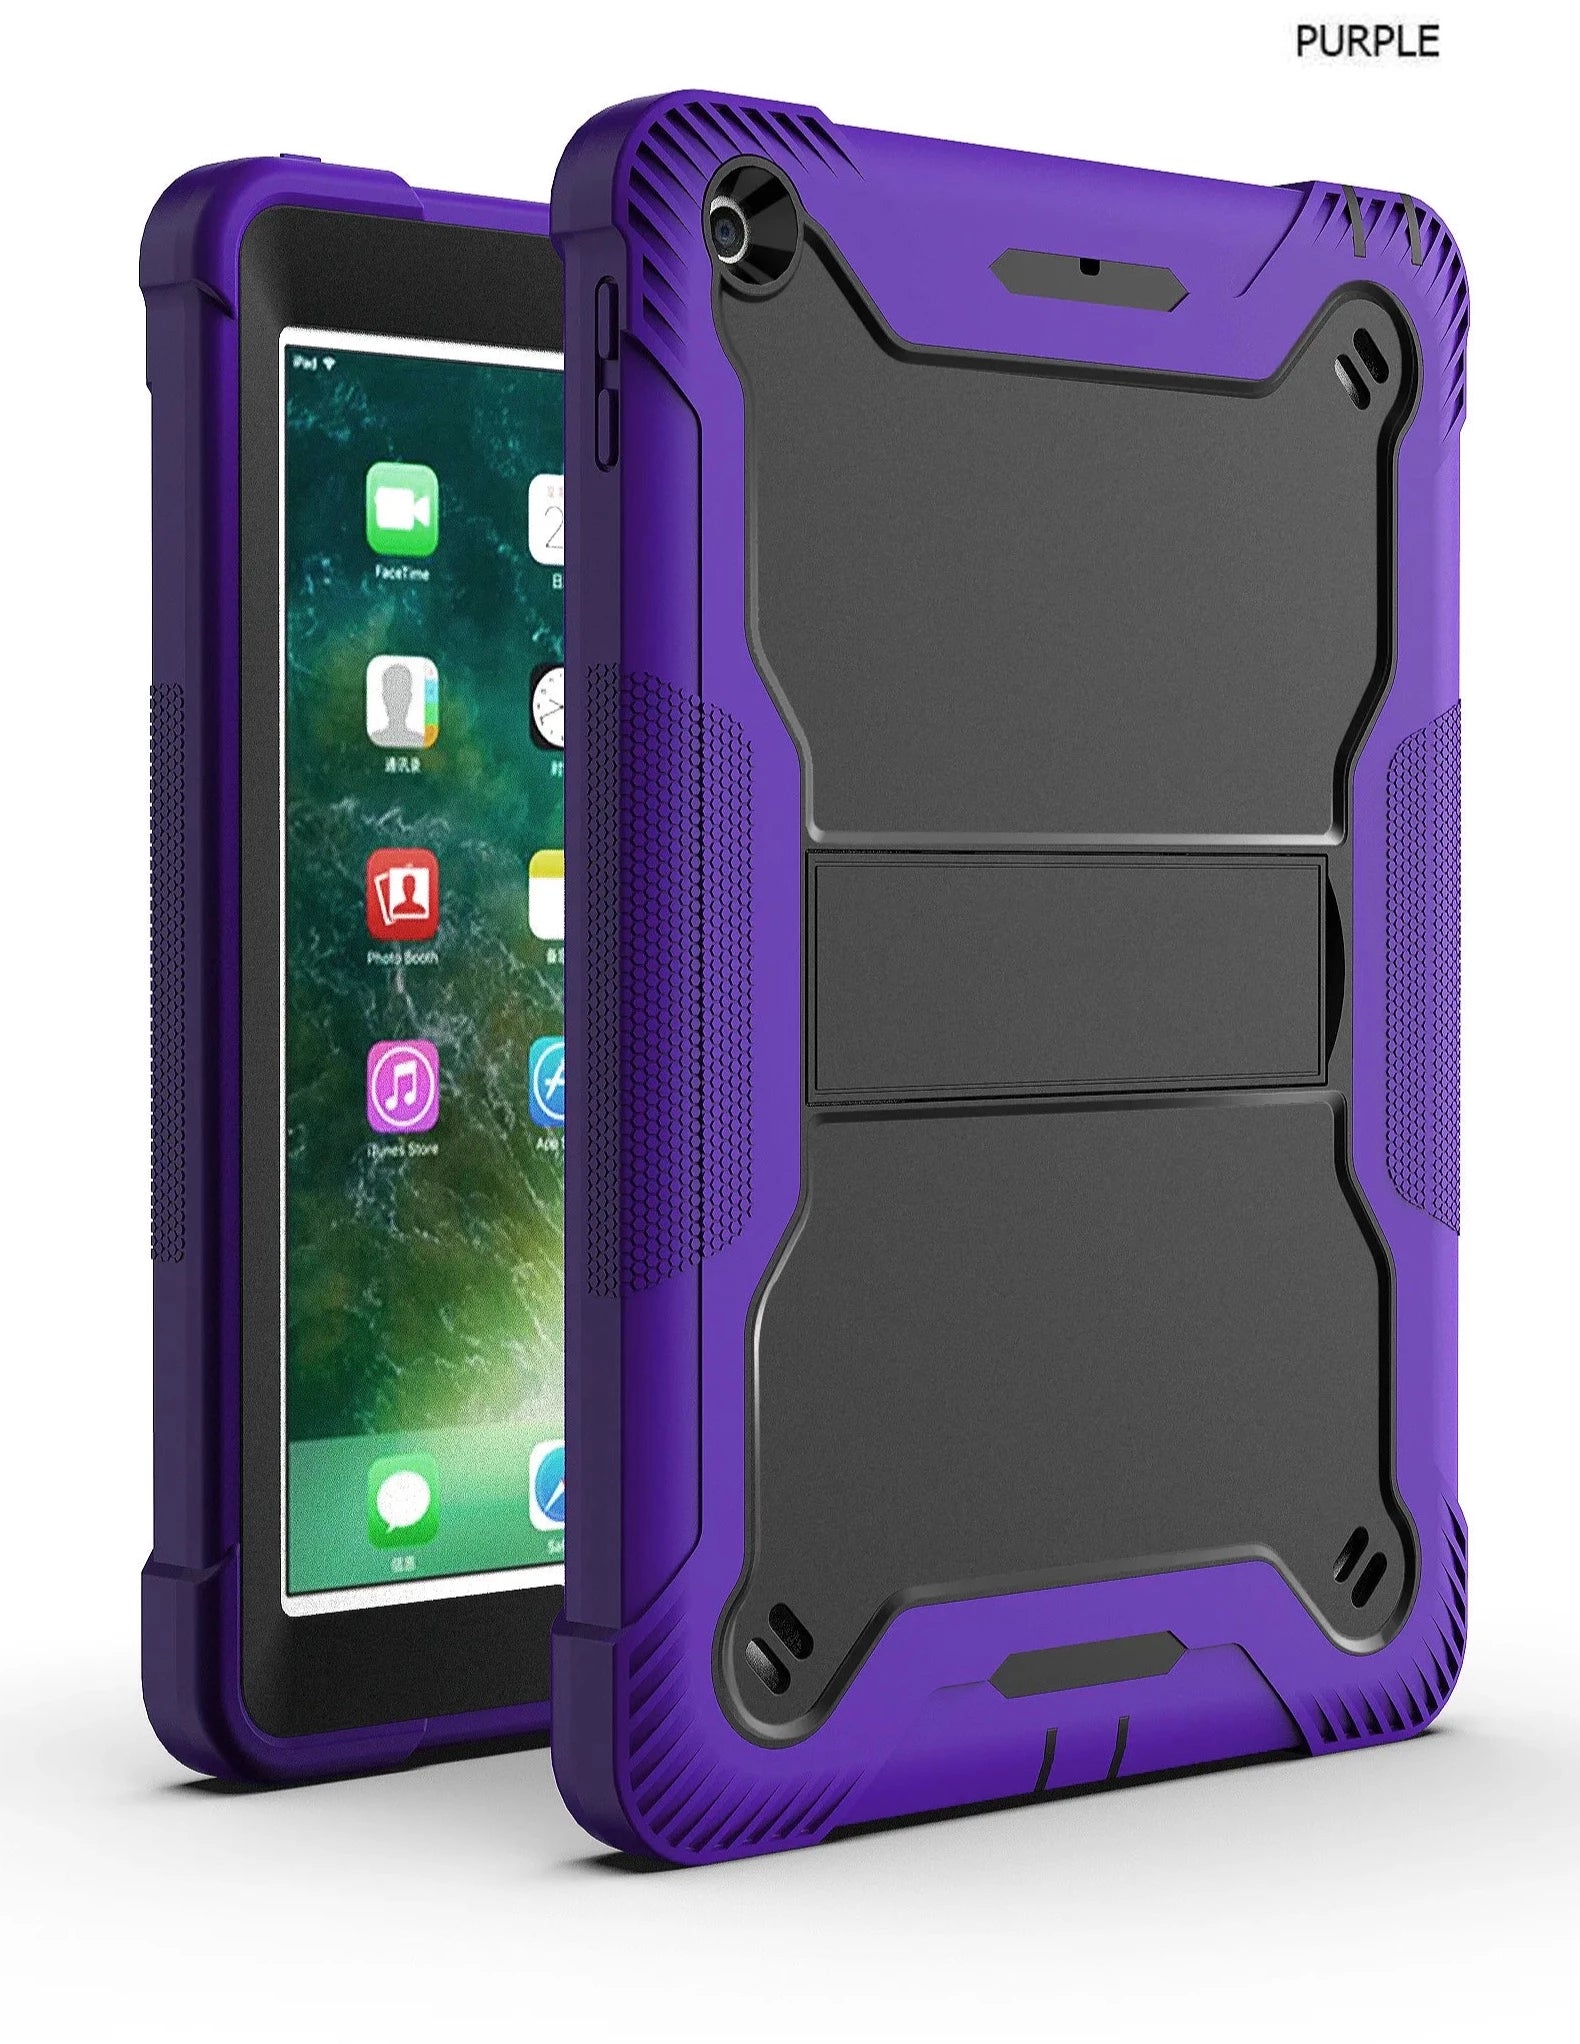 Apple iPad 5, 6, Air 2 (9.7 inch) Purple Shockproof Rugged Case with Kickstand